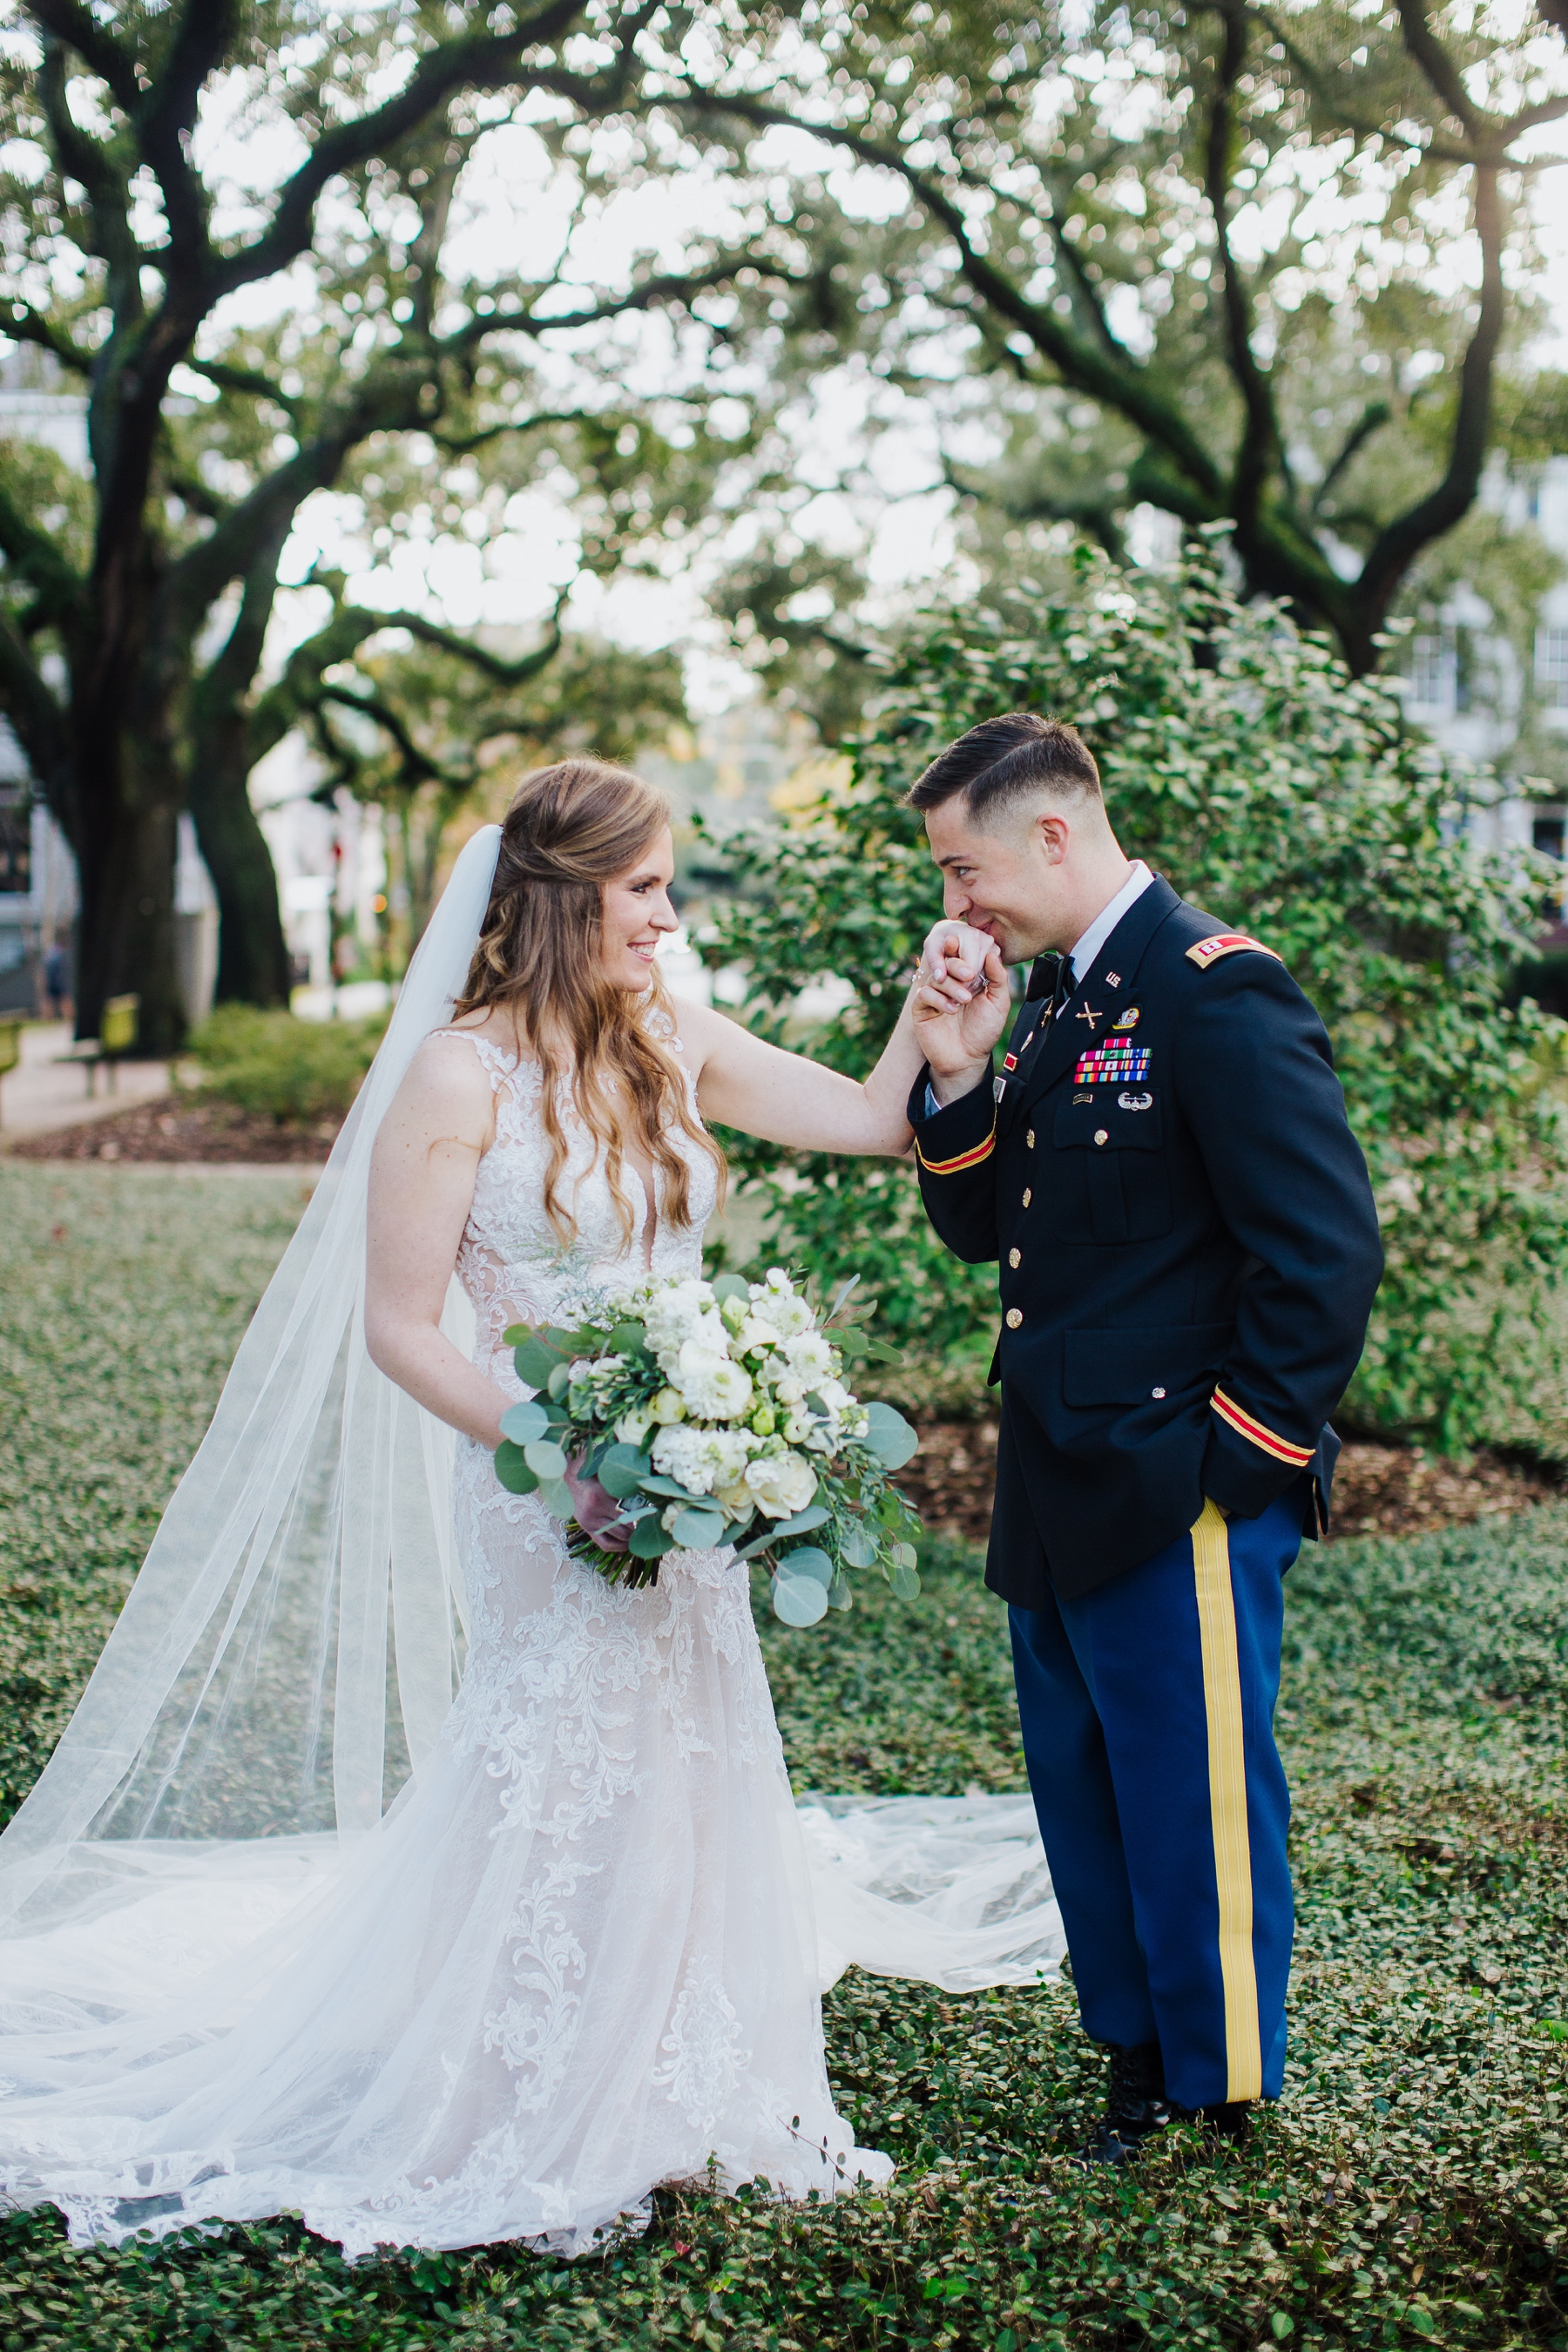 Emilee & Jenkins Harper Fowlkes House wedding by Izzy Hudgins Photography